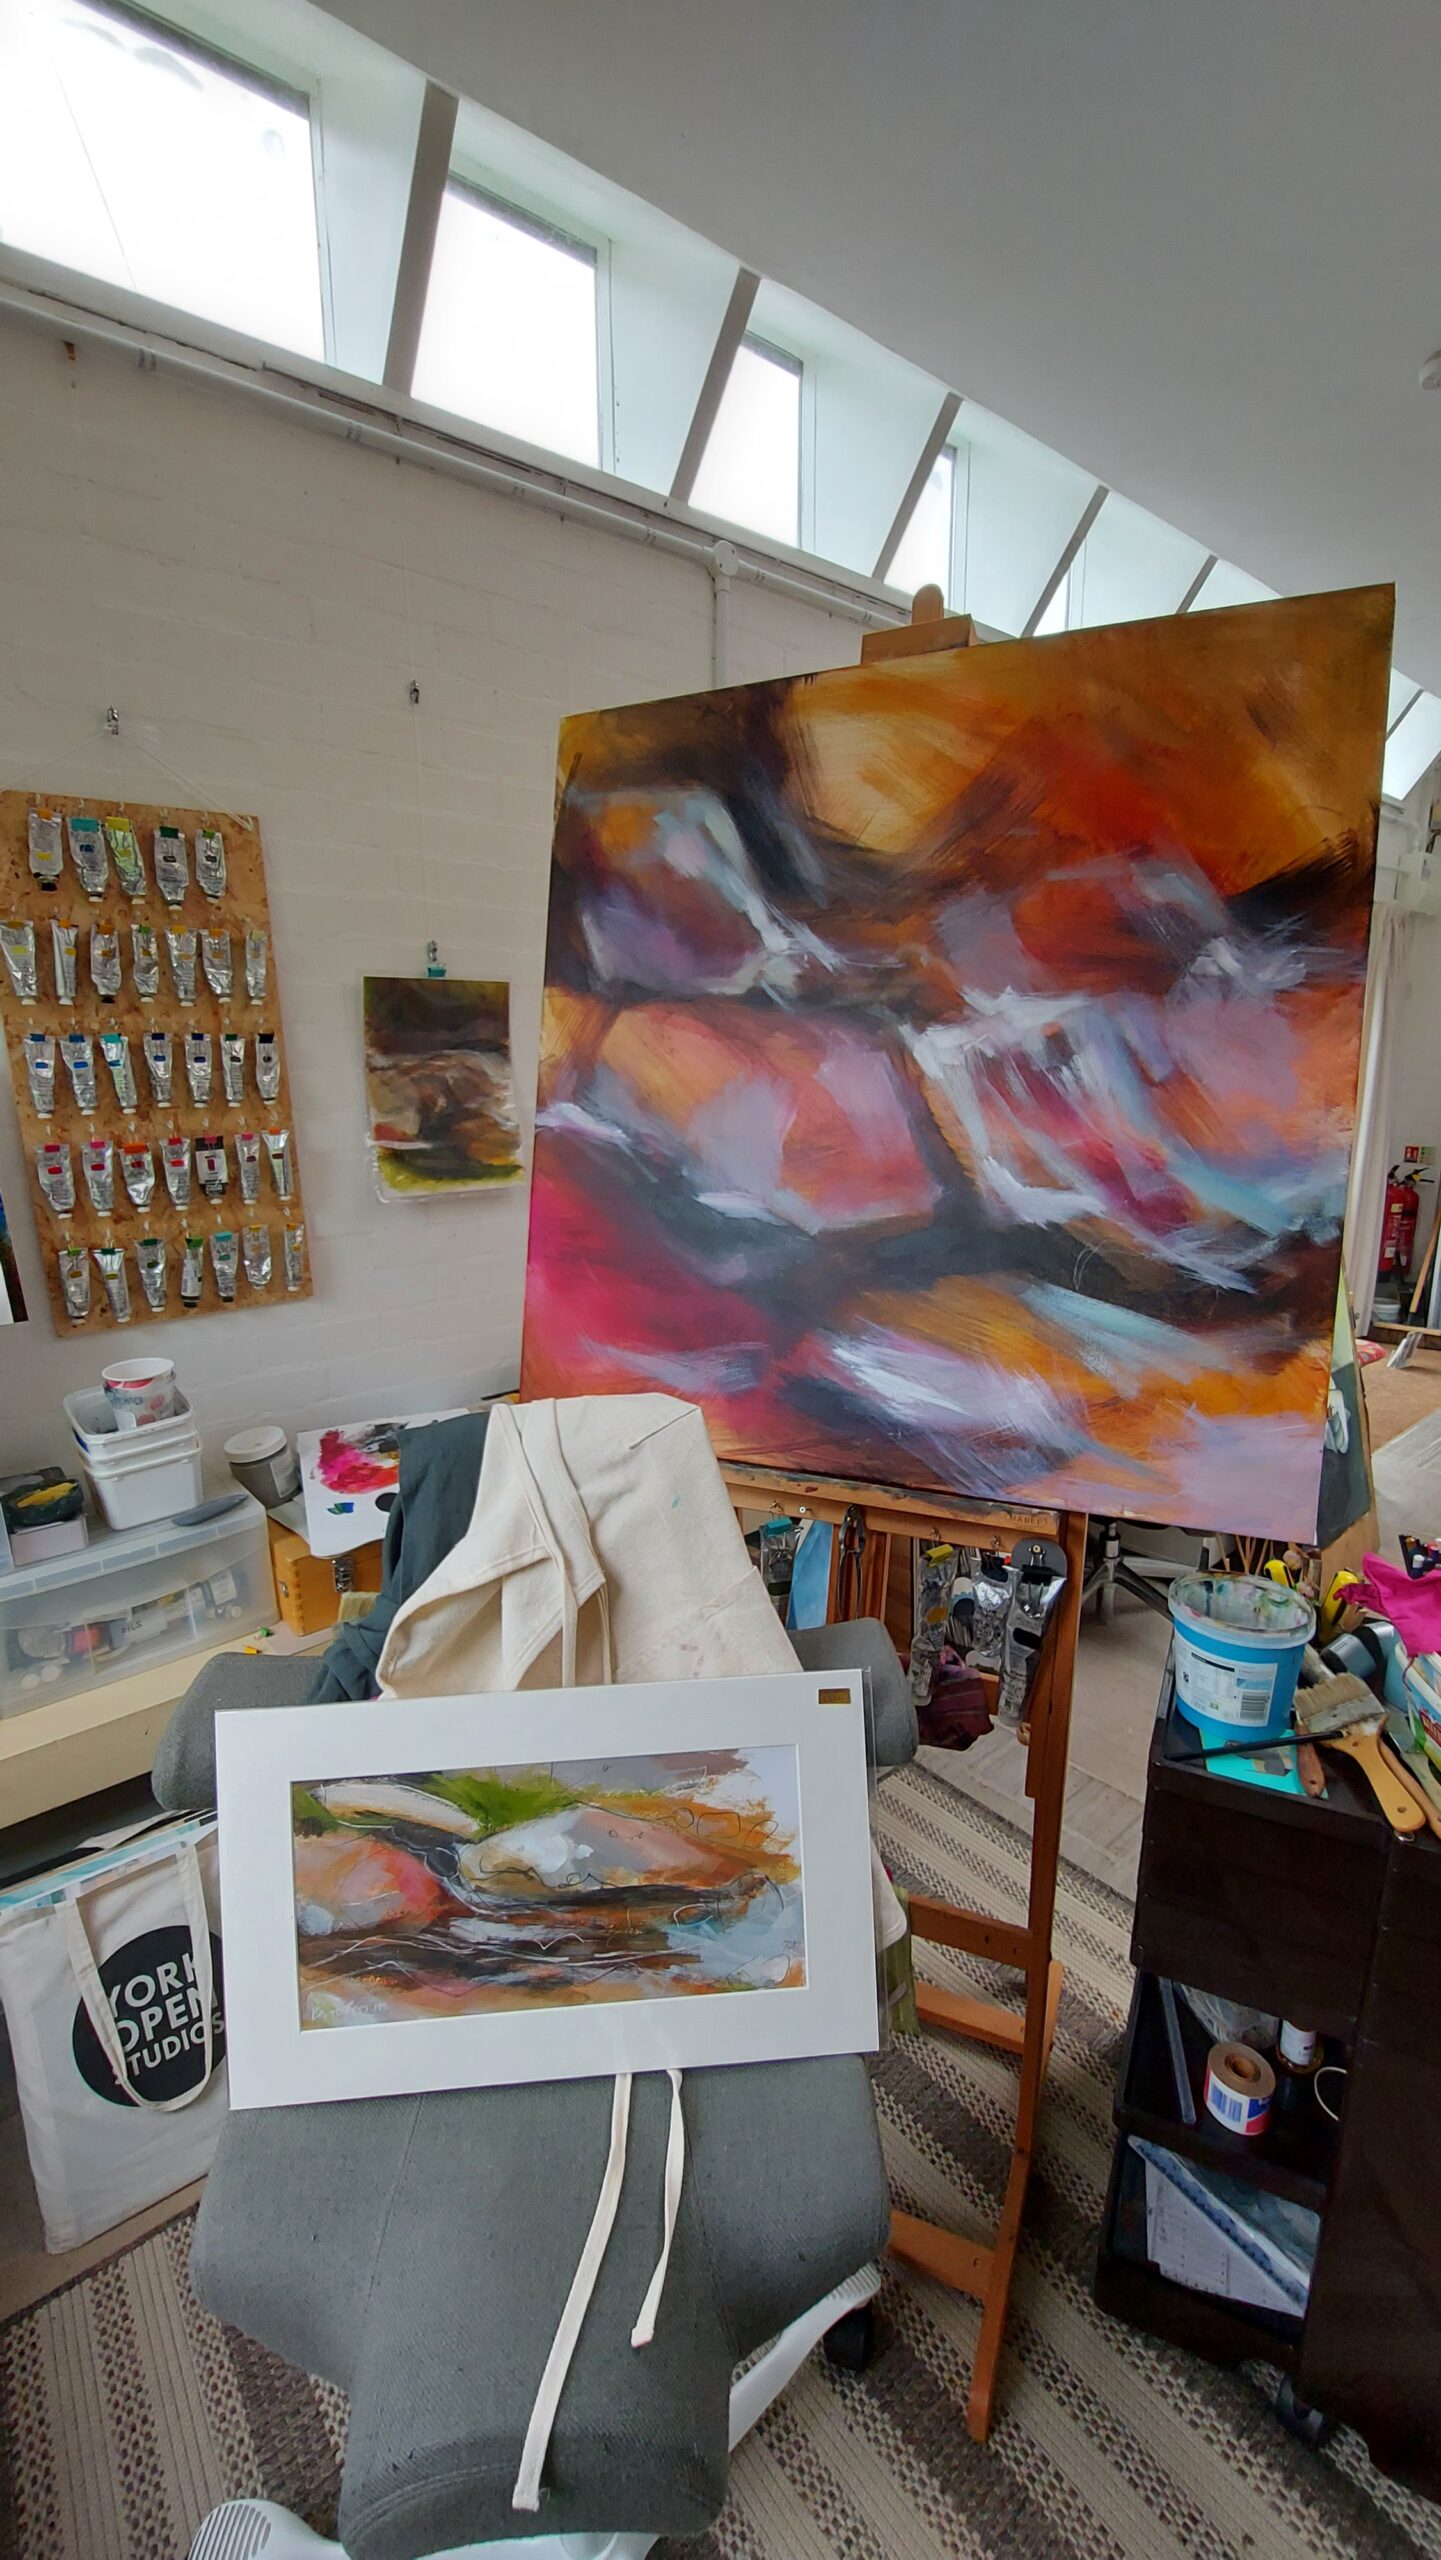 'Iron River' on the easel (work in progress)